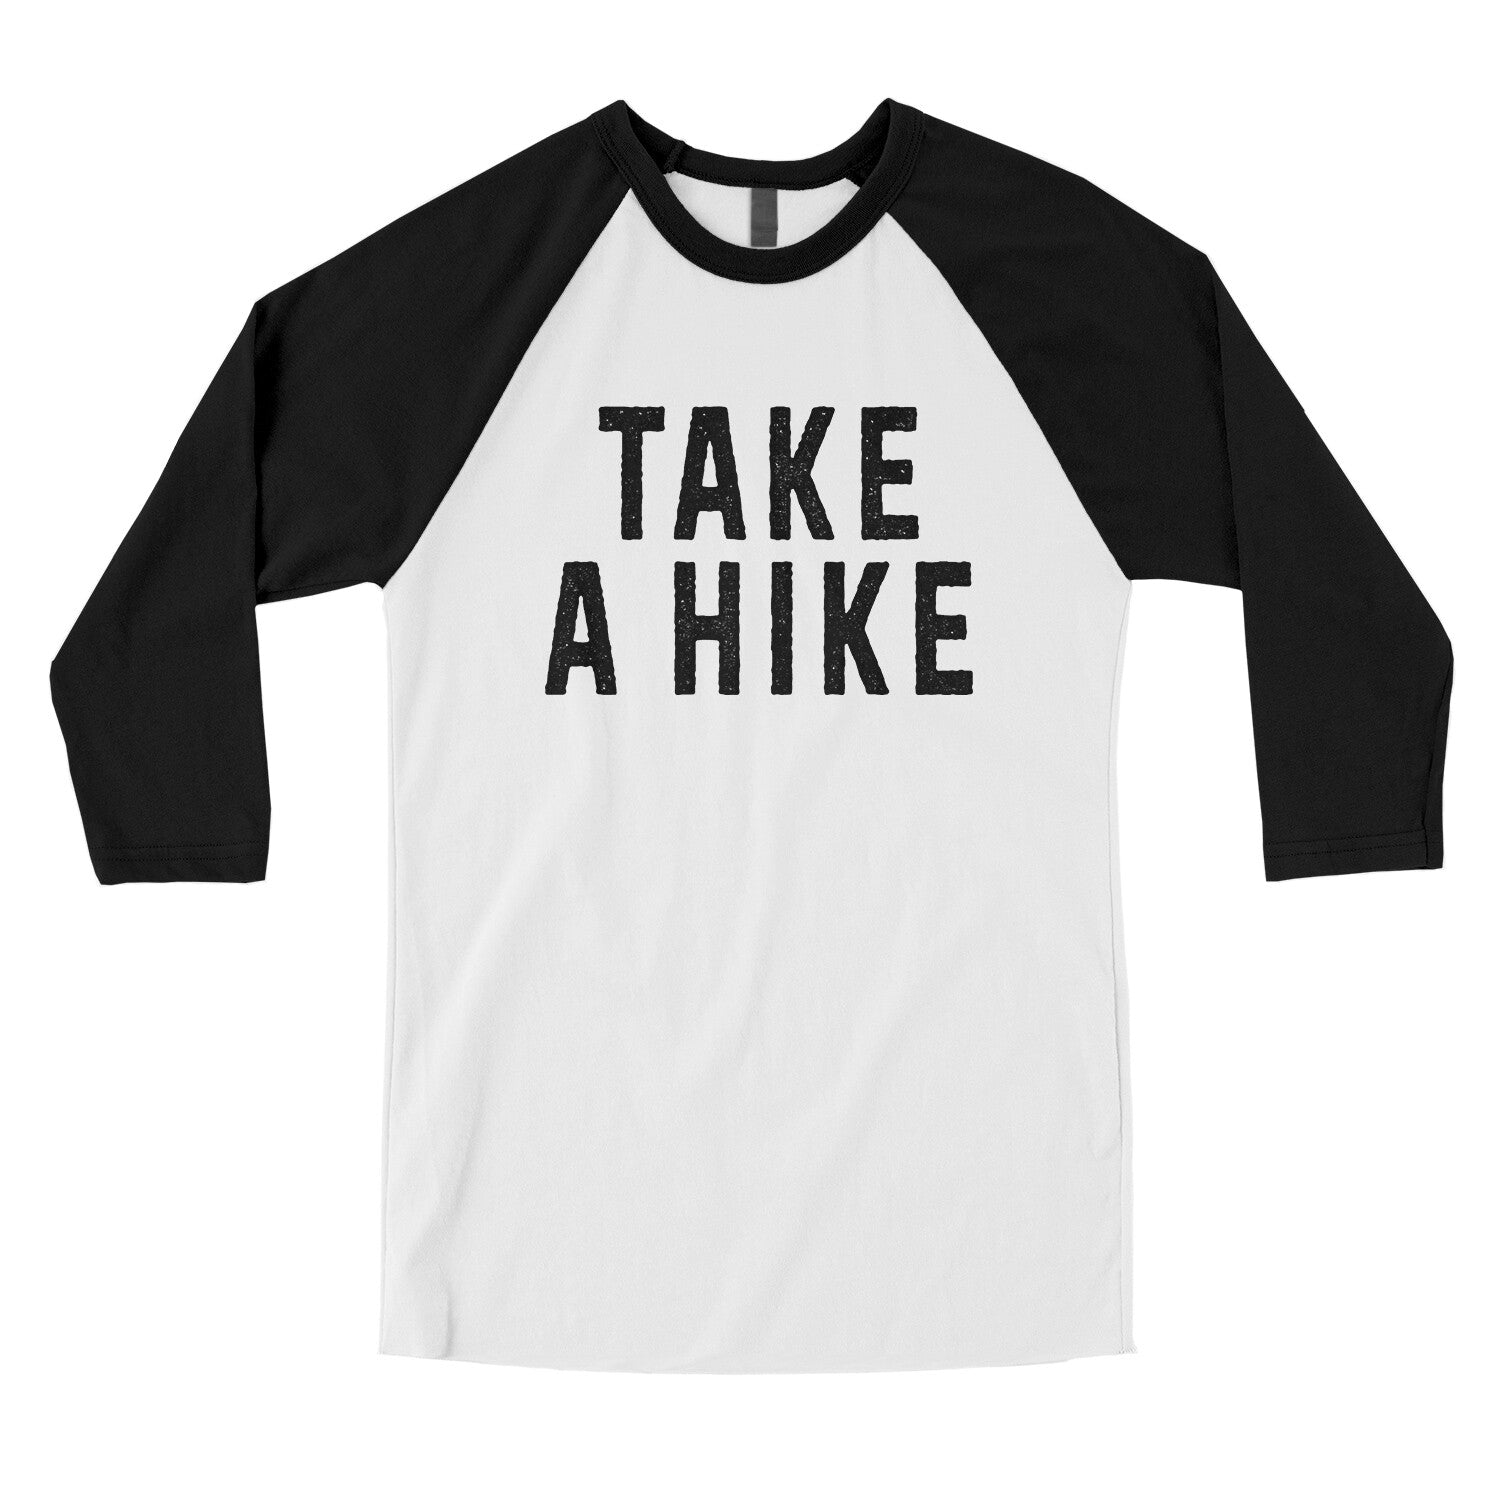 Take a Hike in White with Black Color